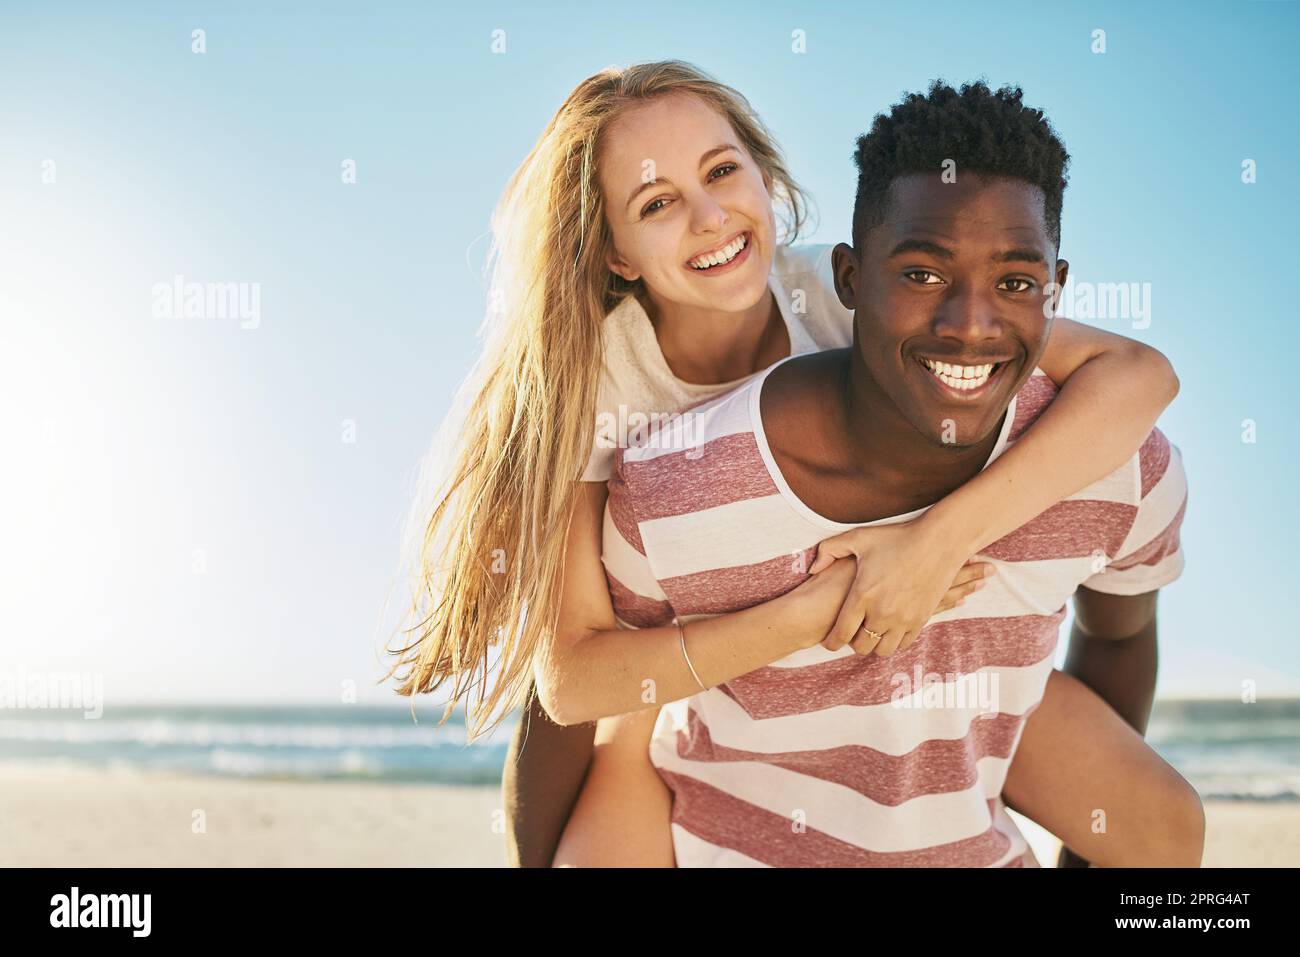 Nothing says summer romance like a piggyback ride. a happy young couple enjoying a piggyback ride at the beach. Stock Photo